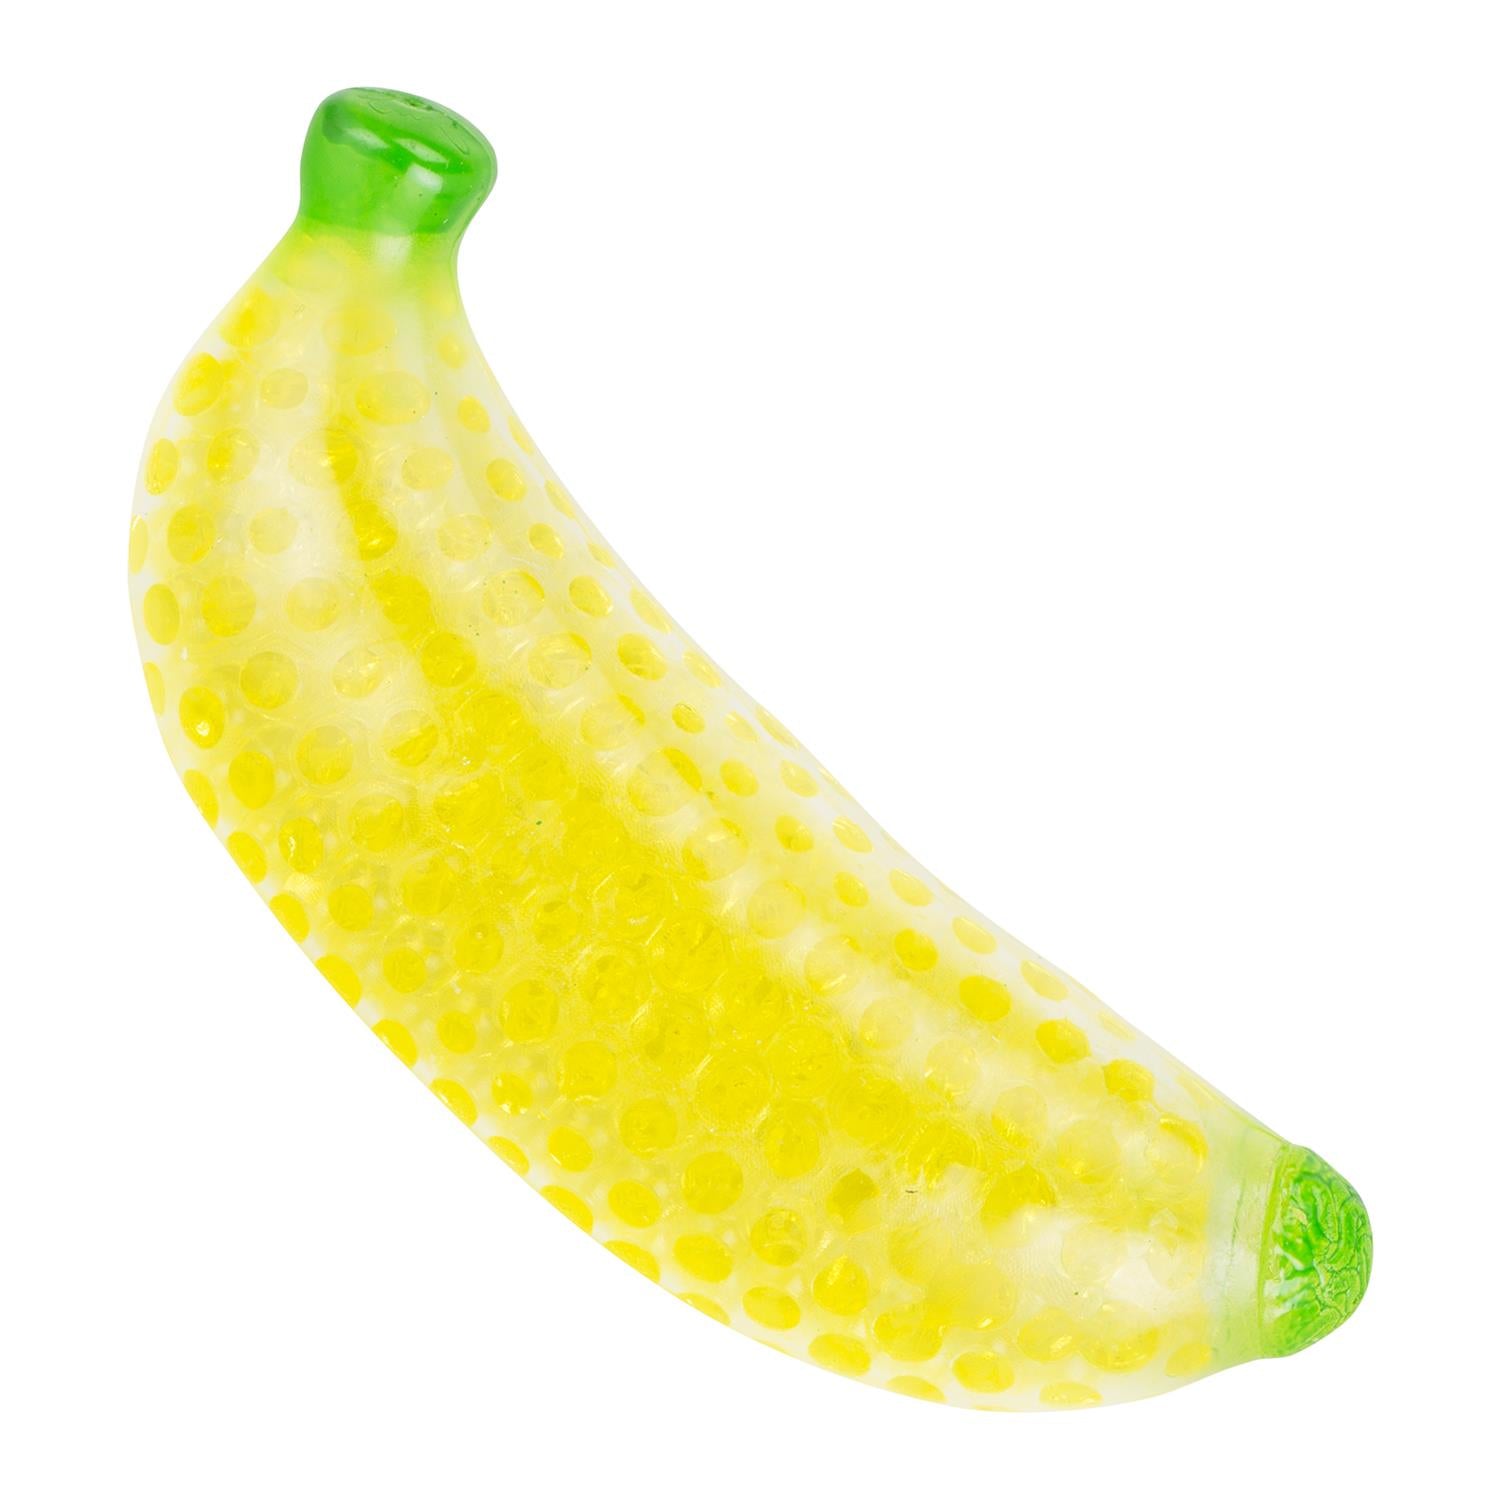 The Magic Toy Shop Fruit Squishies Bead Banana Pressure Release Sensory Toy